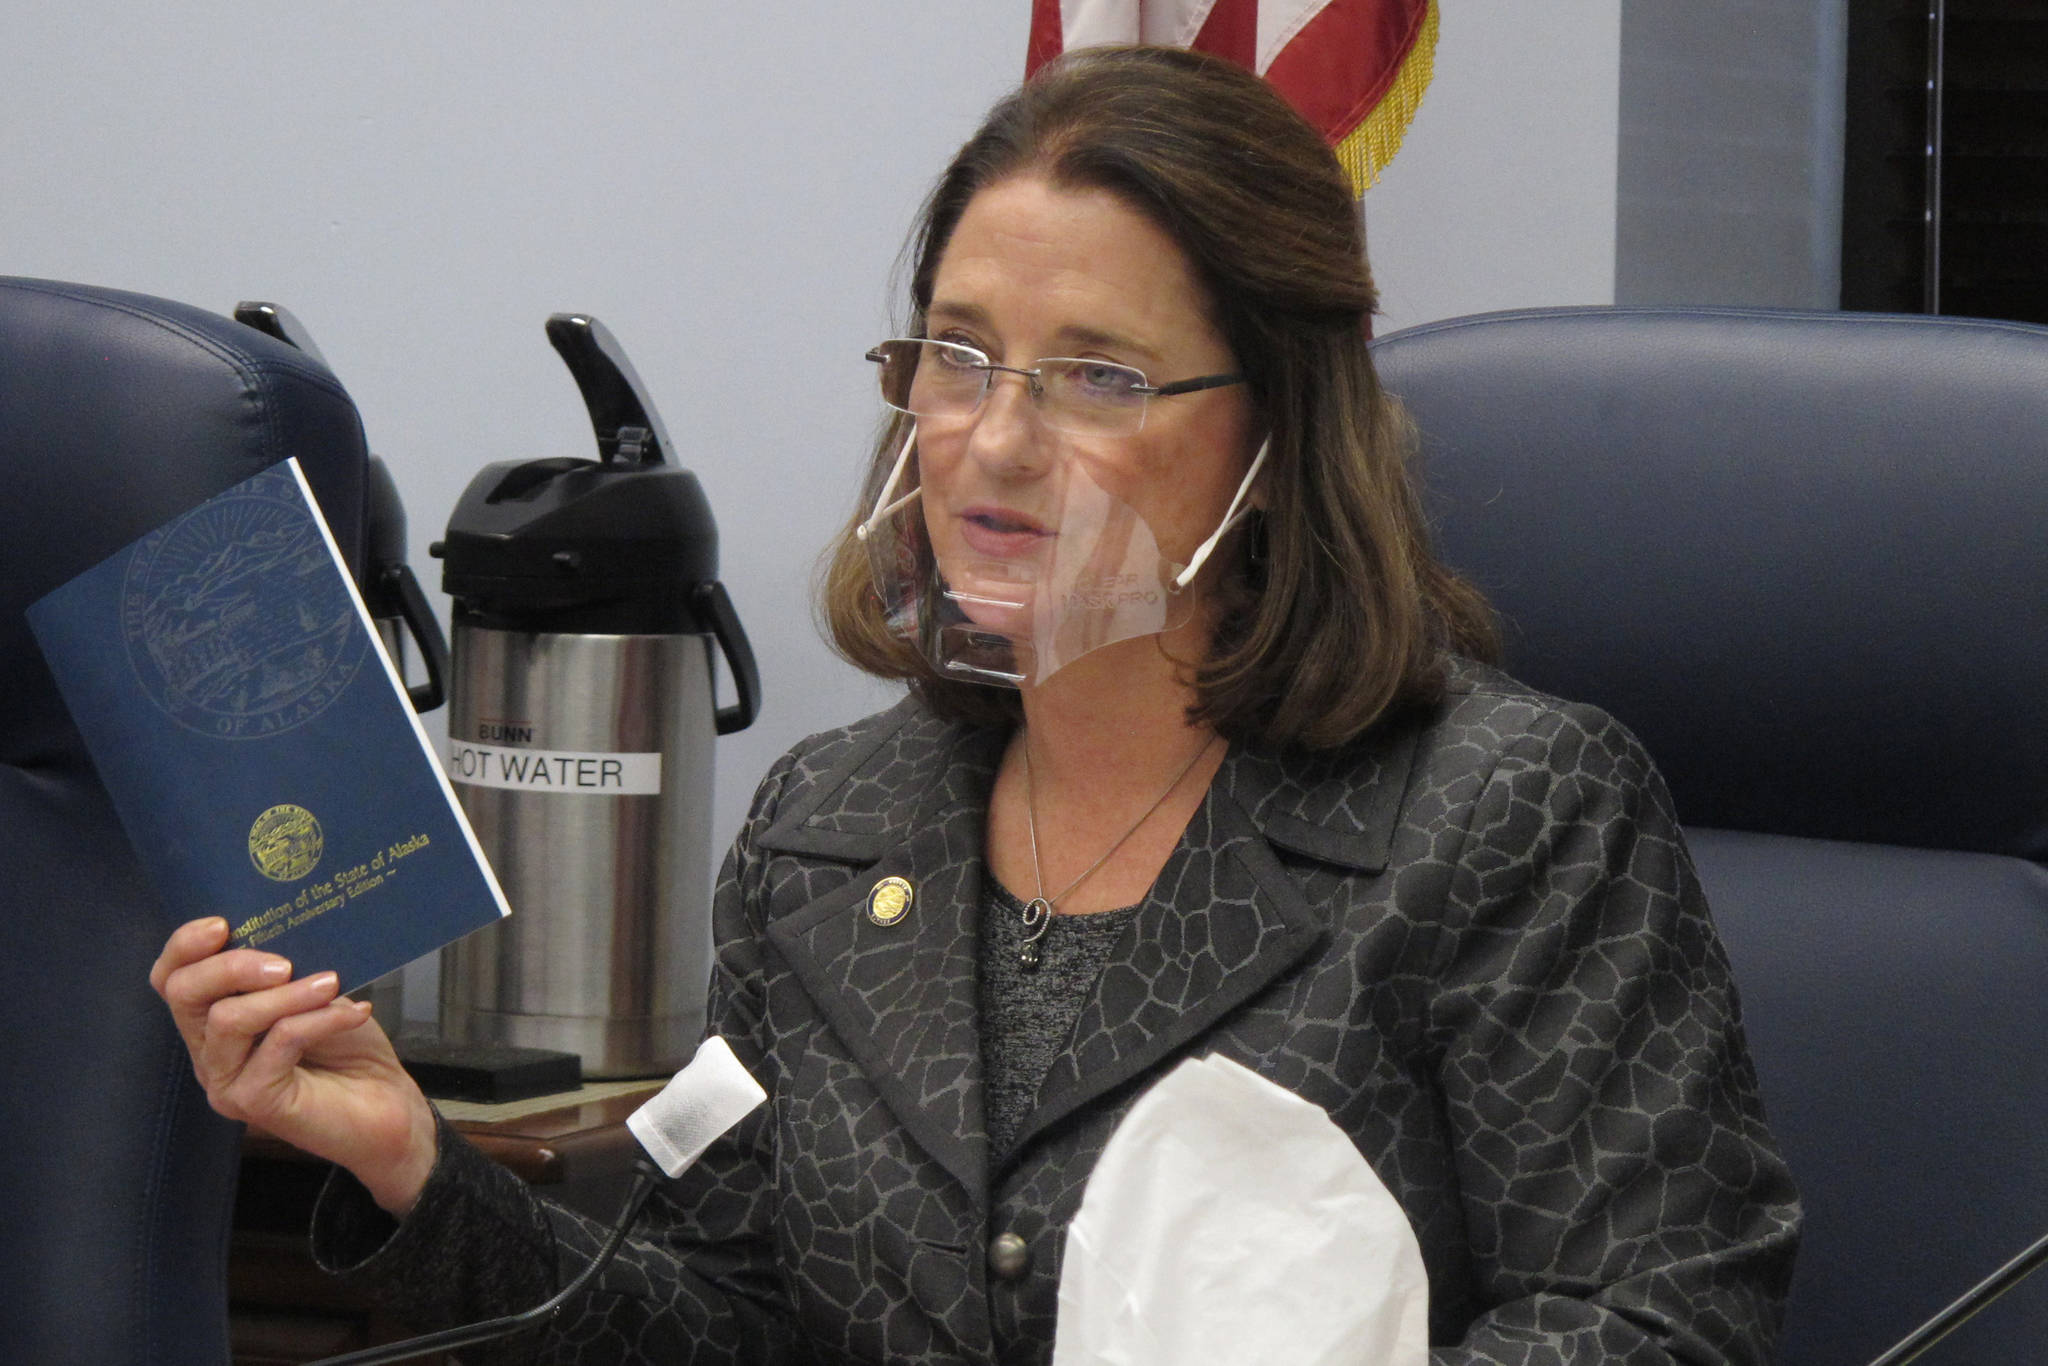 Alaska state Sen. Lora Reinbold, an Eagle River Republican, holds a copy of the Alaska Constitution during a committee hearing in Juneau, Alaska. Reinbold has been a vocal critic, along with other lawmakers, of Gov. Mike Dunleavy’s disaster declarations while the Legislature was not in session. She has used her committee to amplify voices of those who question the effectiveness of masks and the usefulness of the government’s emergency response. In a scathing letter that included references to her Facebook posts, Dunleavy accused Reinbold of misrepresenting the state’s COVID-19 response and deceiving the public. “The misinformation must end,” the governor wrote. (AP Photo / Becky Bohrer)